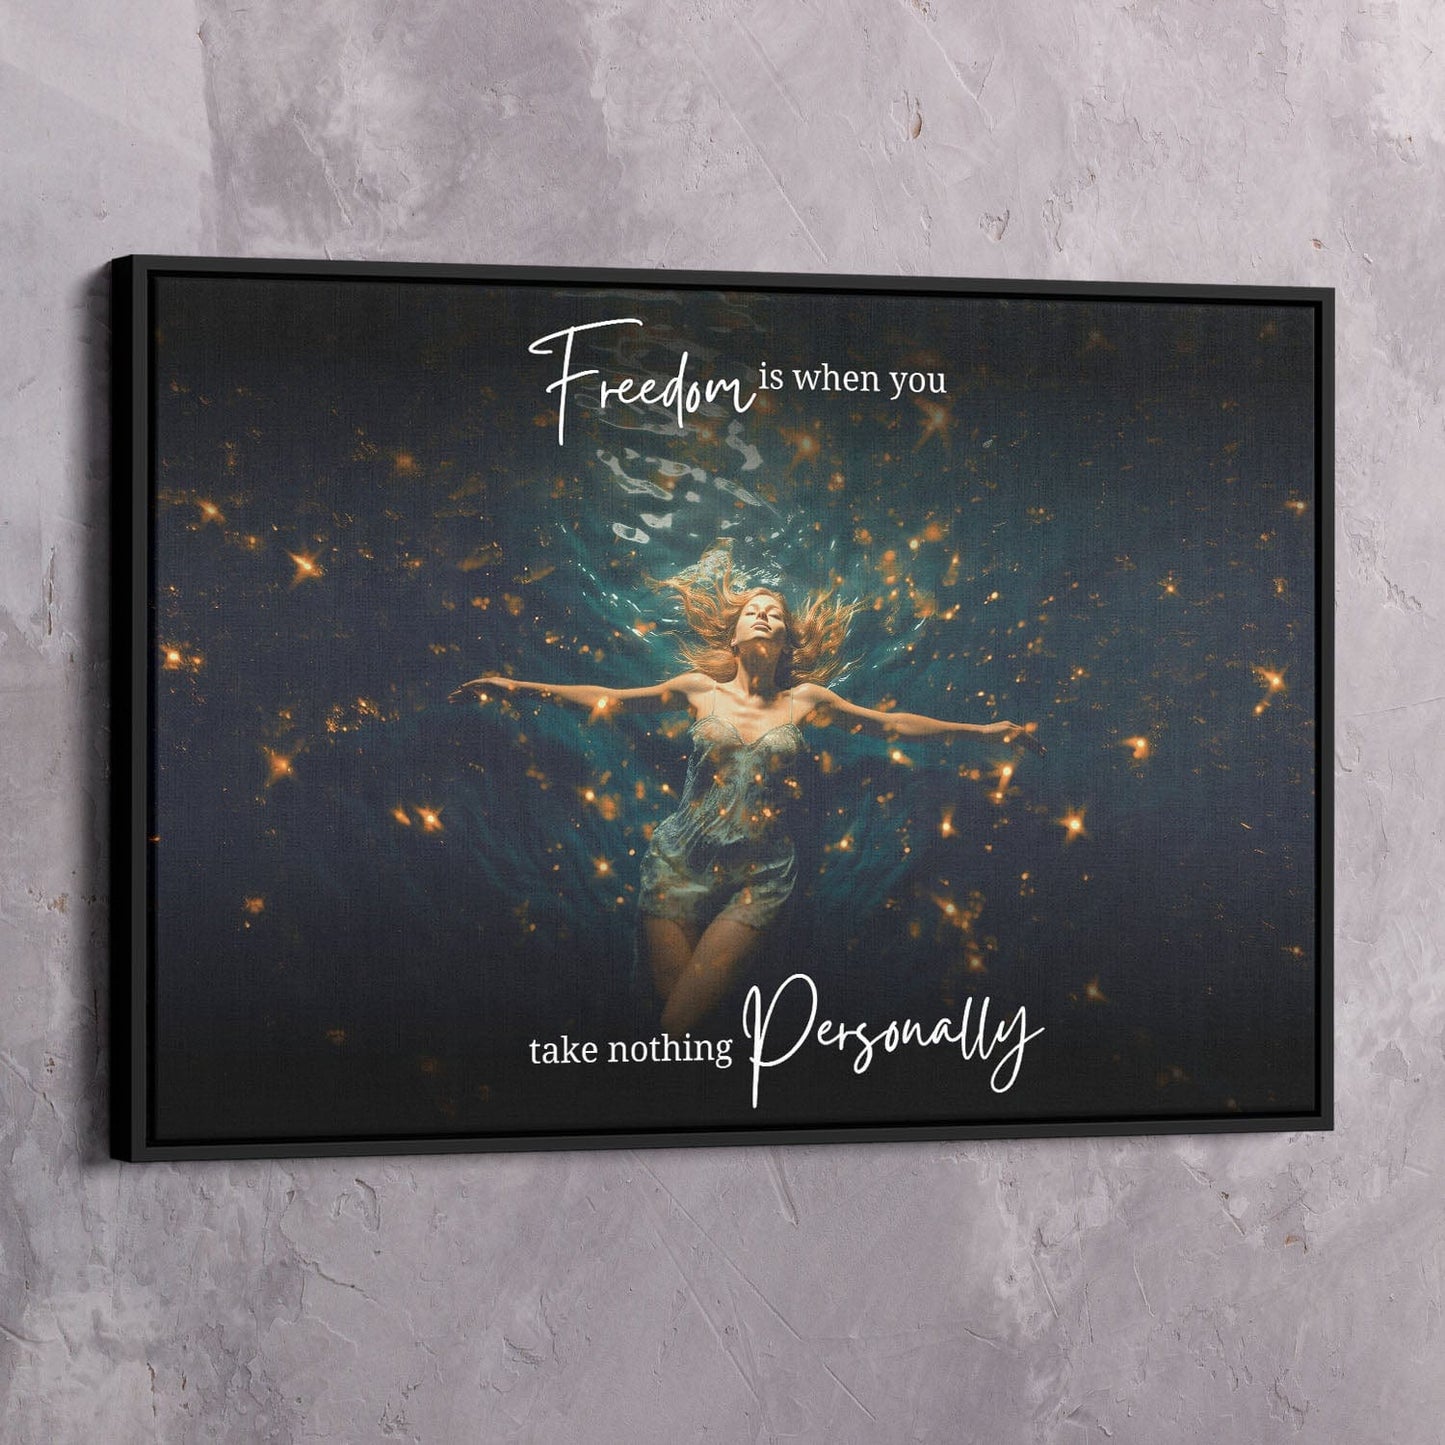 Freedom is when you take nothing personally Wall Art | Inspirational Wall Art Motivational Wall Art Quotes Office Art | ImpaktMaker Exclusive Canvas Art Landscape